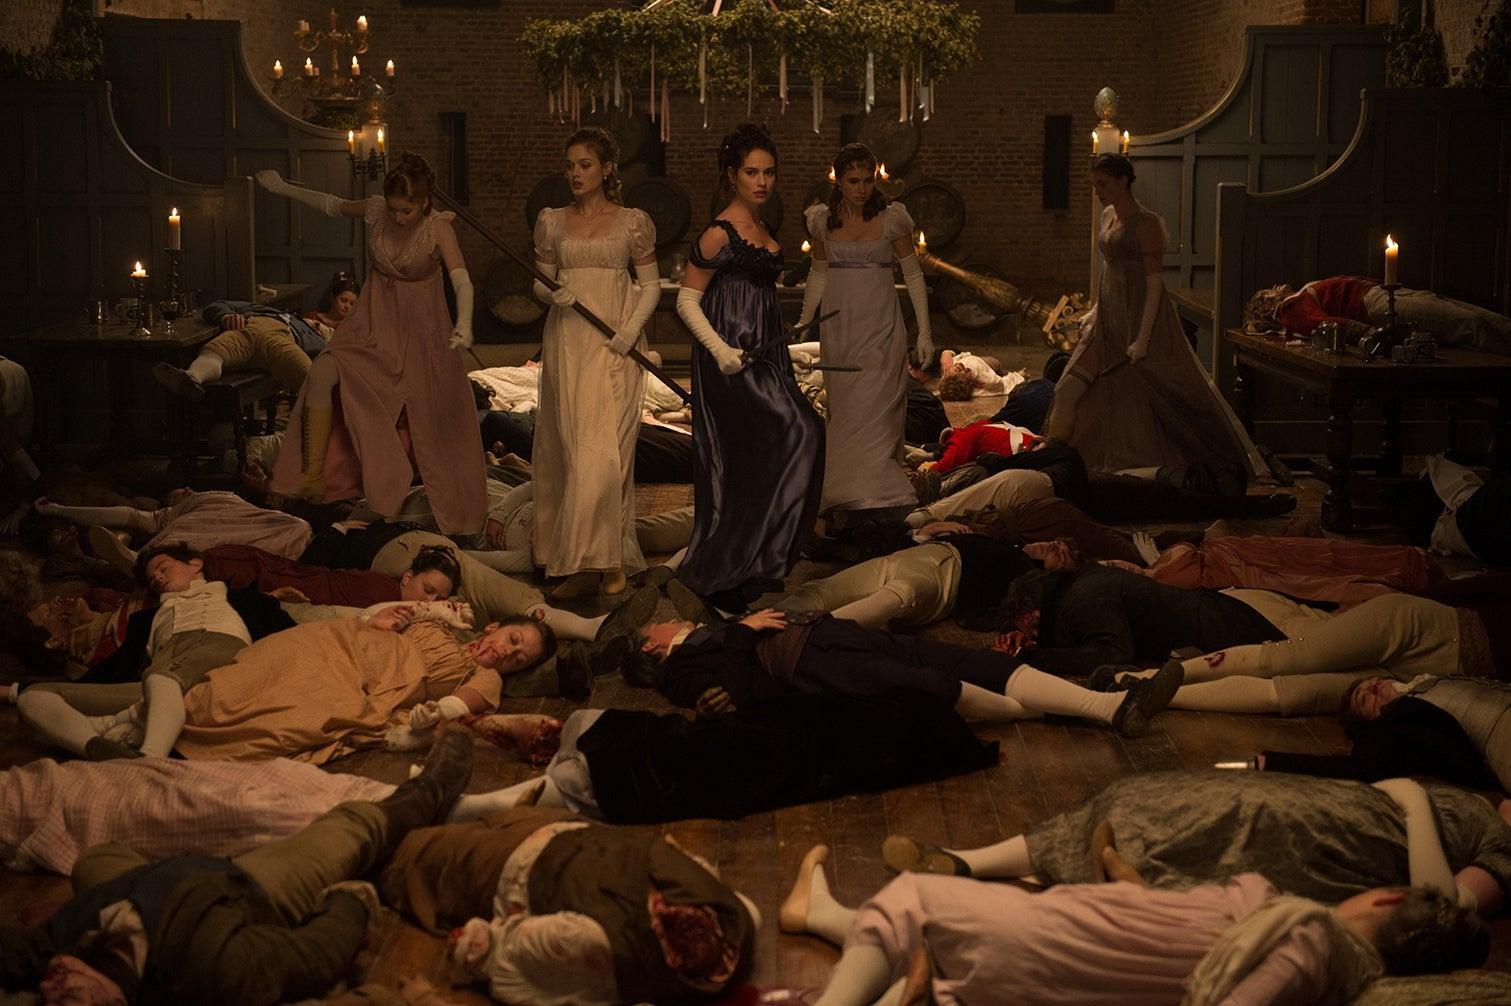 Bodies and bodices: the costume drama ‘Pride and Prejudice and Zombies’